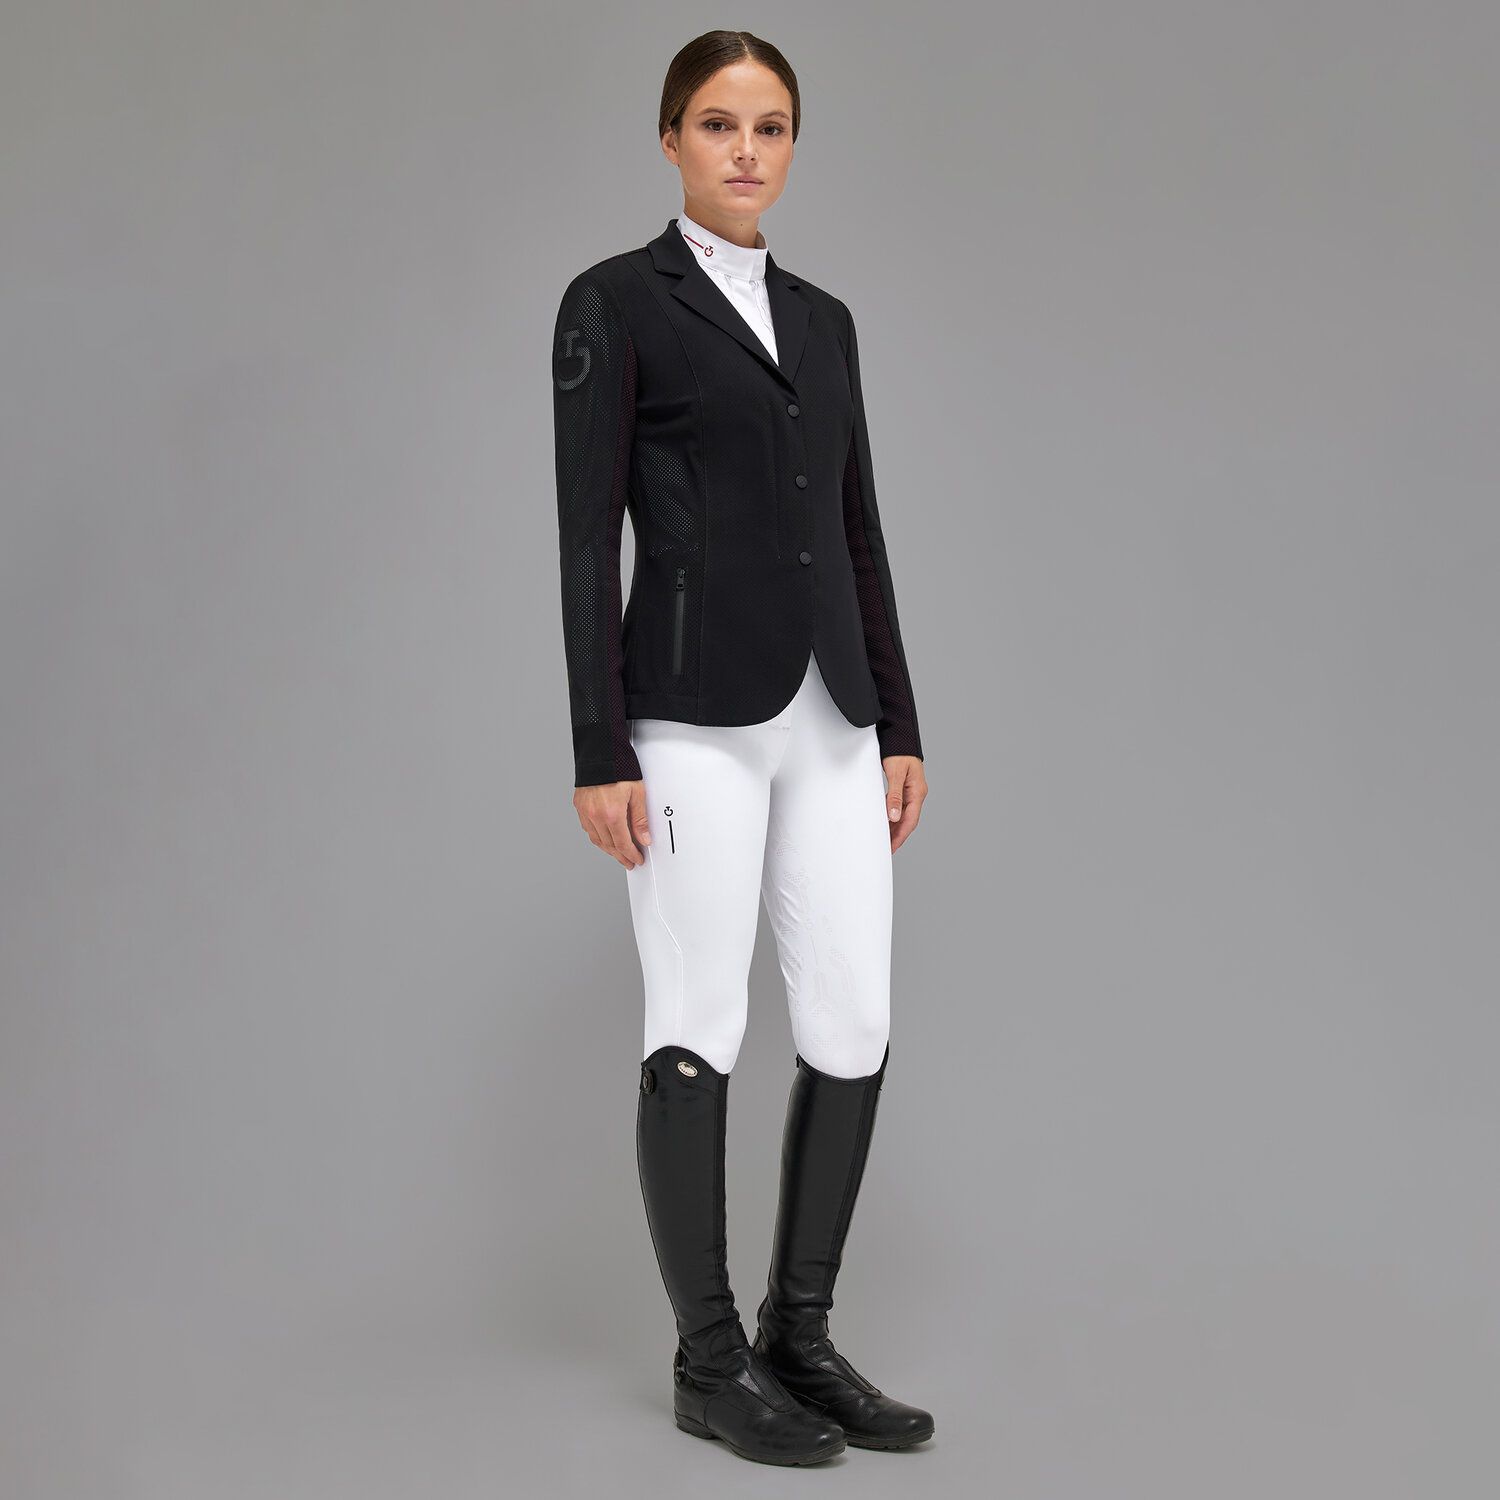 Cavalleria Toscana Women's competition riding jacket embroidery Black/ Rose-2